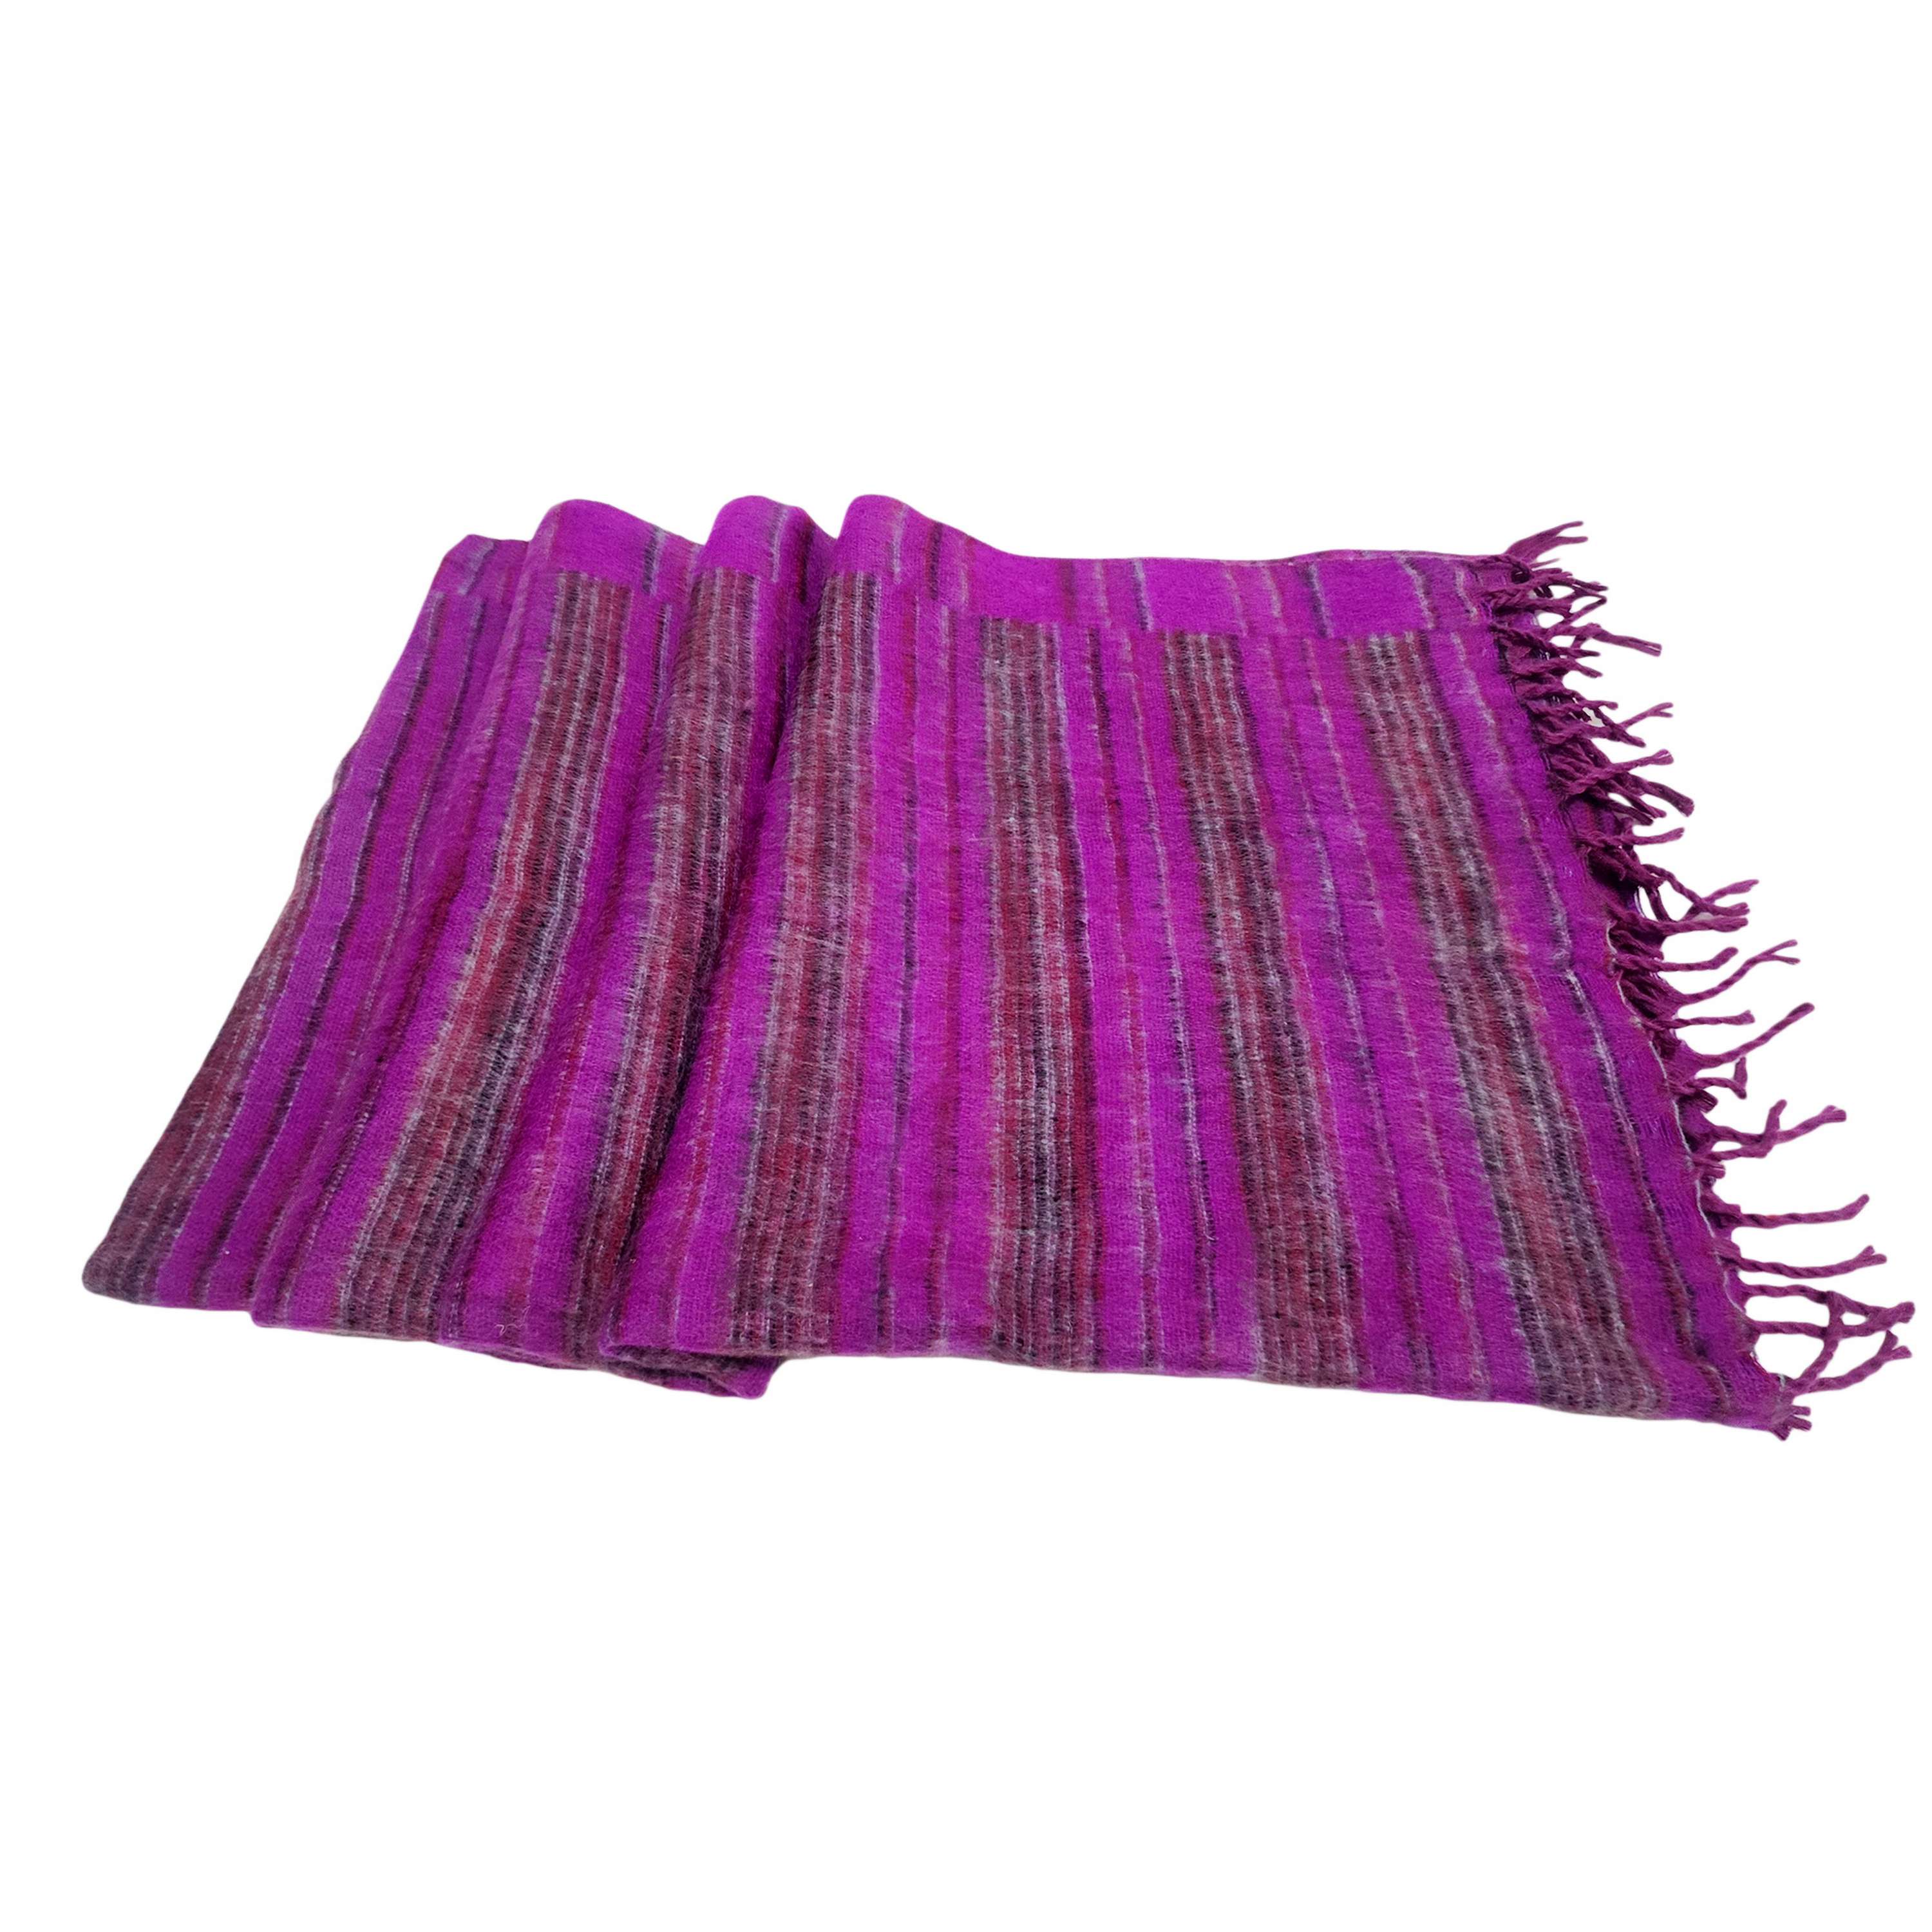 Tibet Shawl, Experience The Luxury Of Acrylic Woolen Shawls In Deep Magenta Color And Stripes